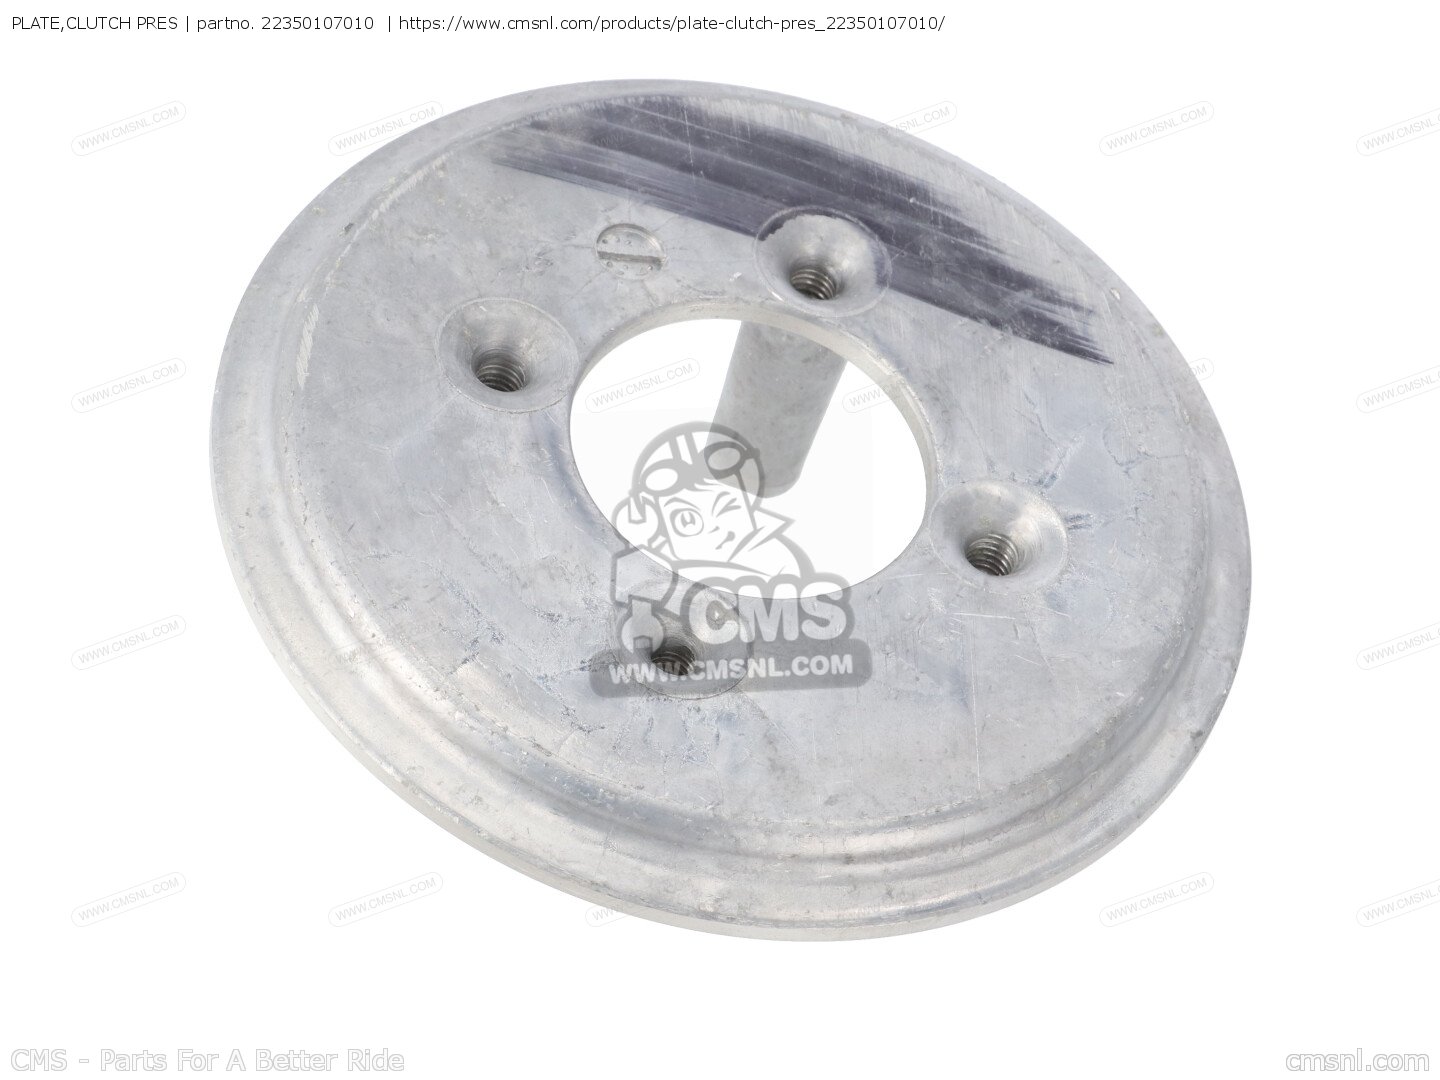 PLATE,CLUTCH PRES for CB125S 1985 (F) USA order at CMSNL